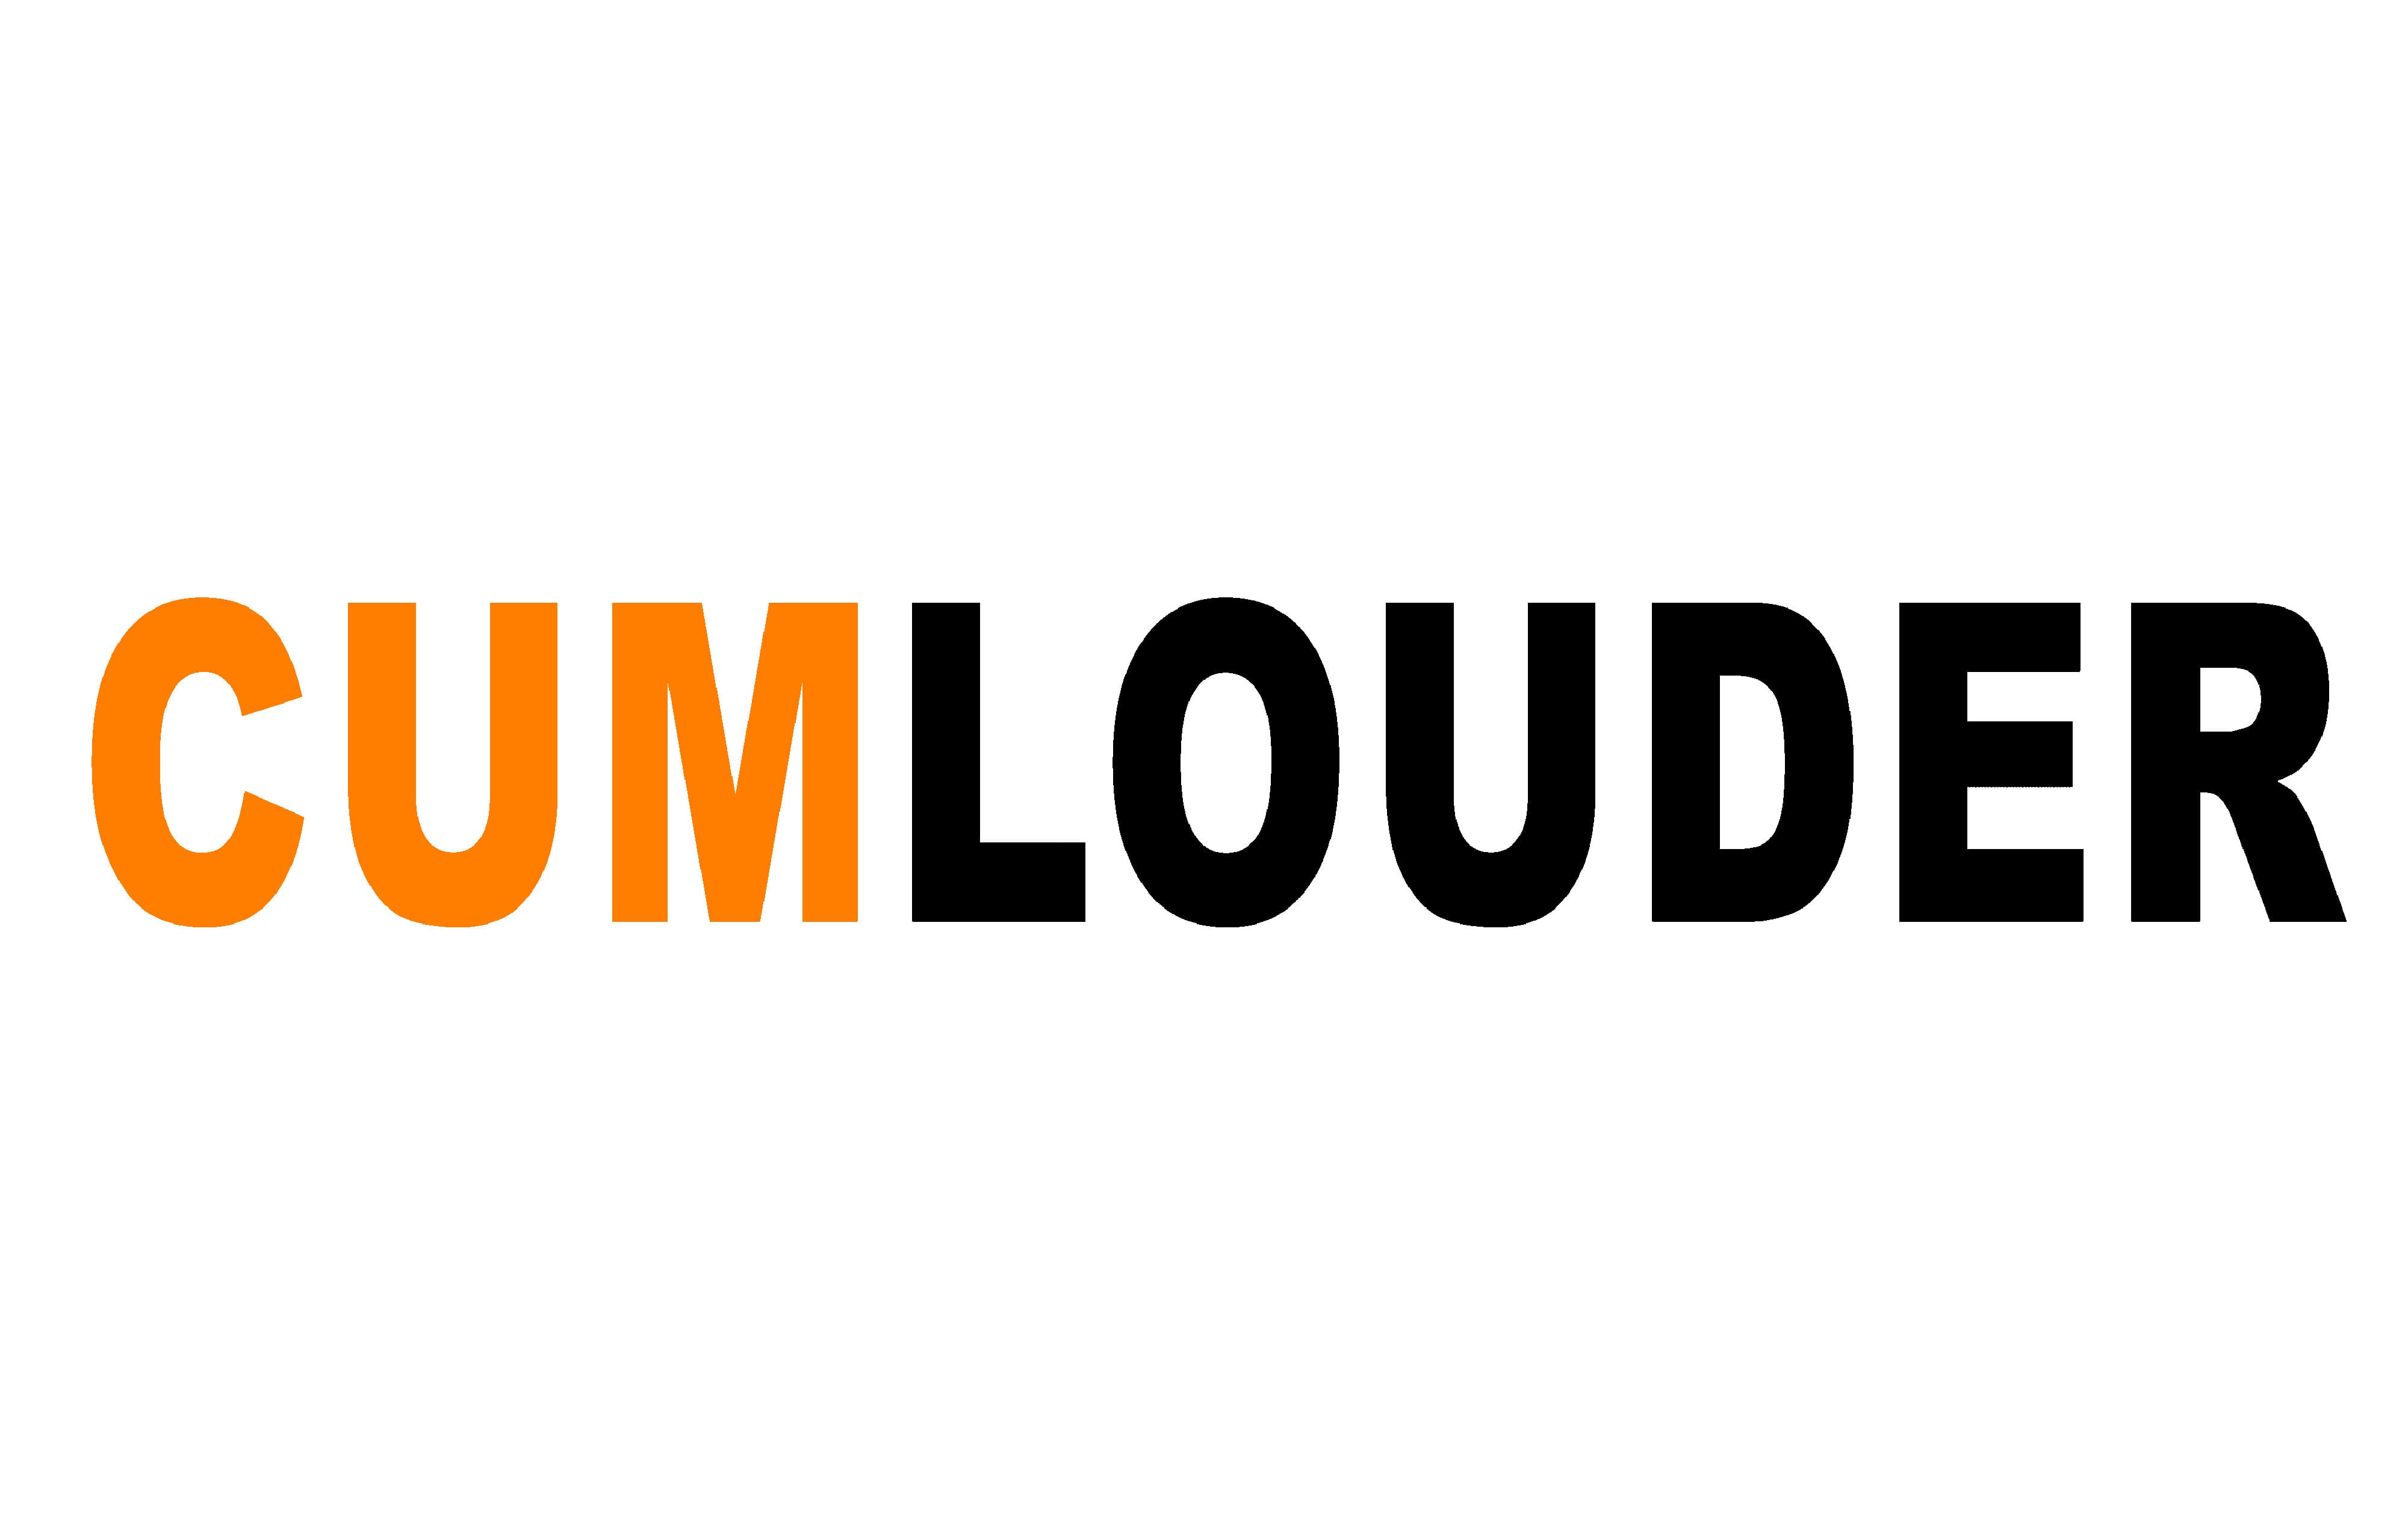 Gumlouder - CumLouder Logo and symbol, meaning, history, PNG, new